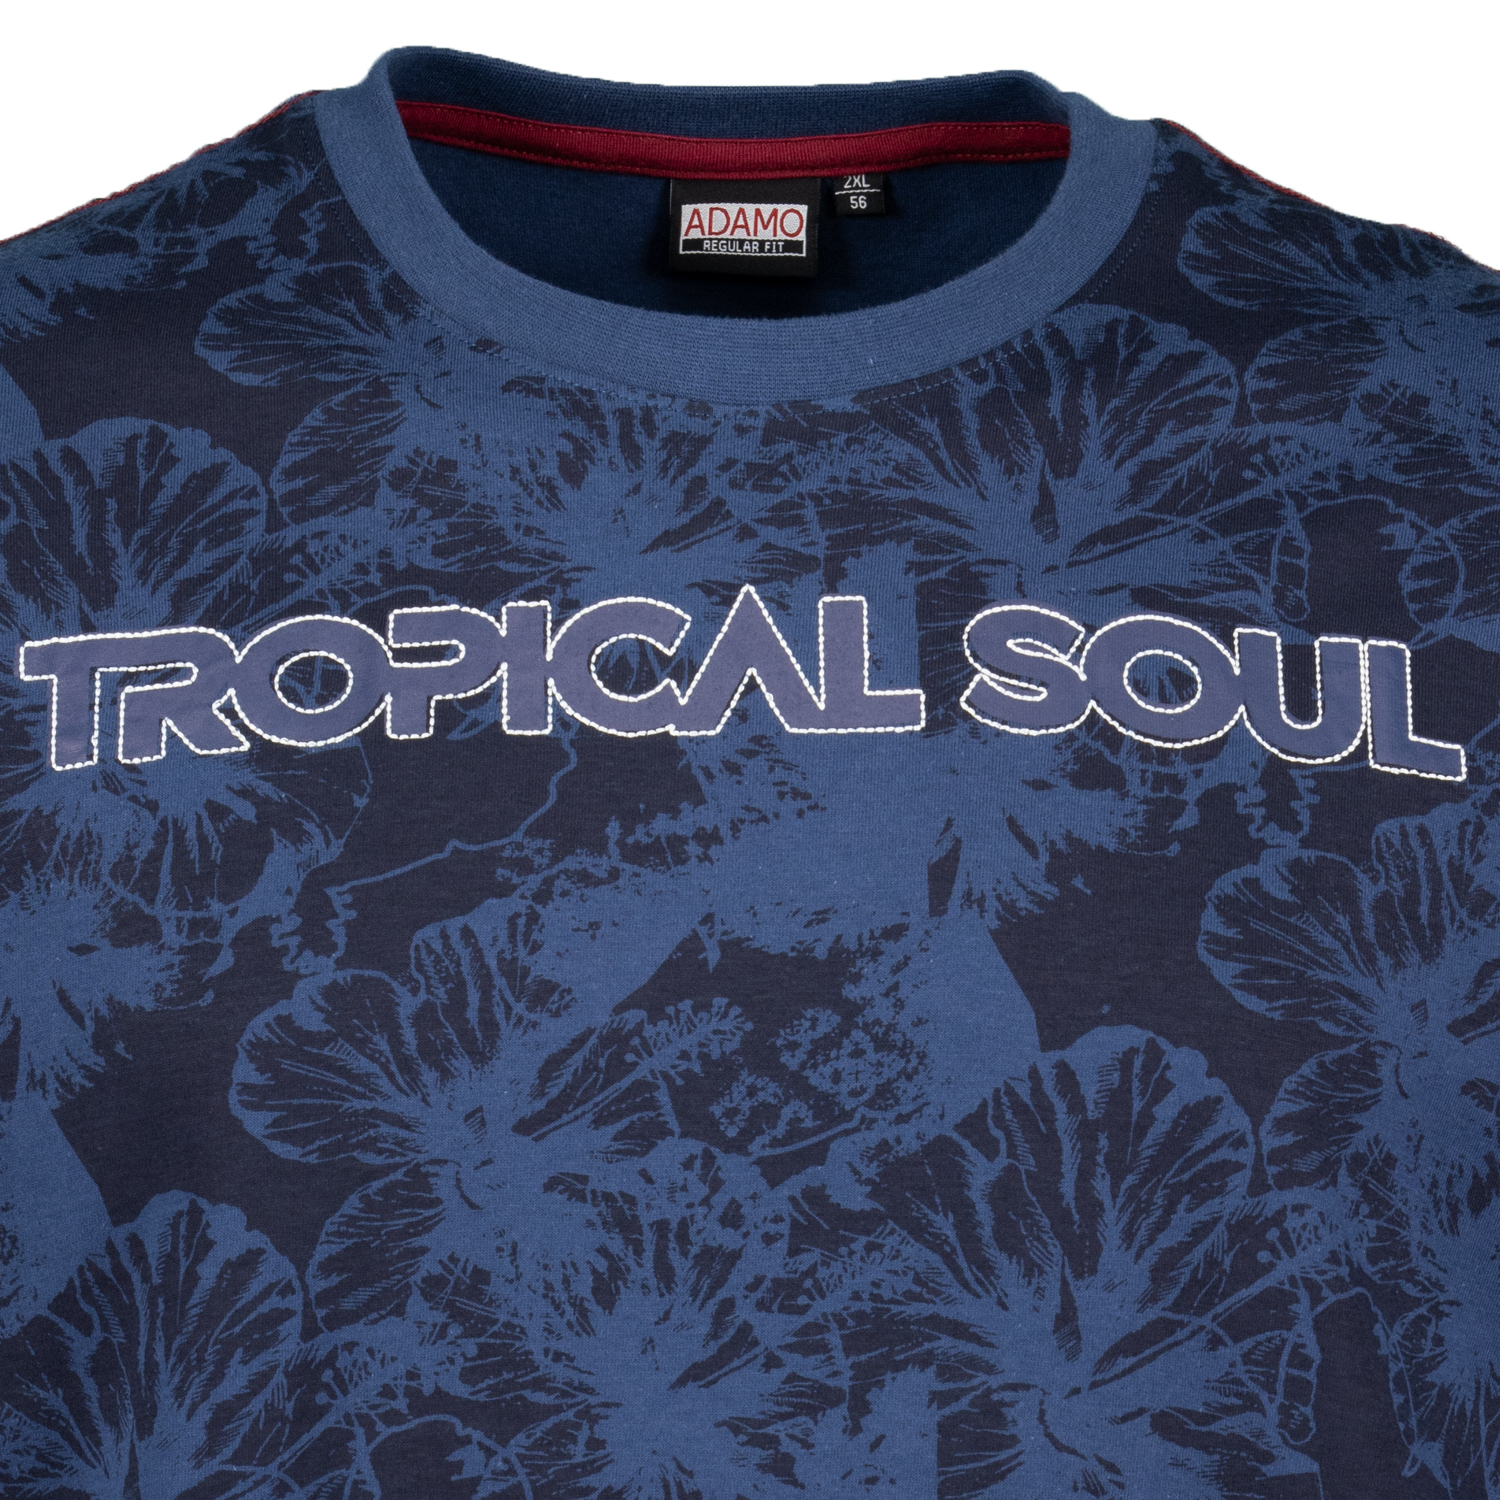 Patterned T-shirt with print and embroidery in navy by ADAMO series TROPICAL up to oversize 10XL